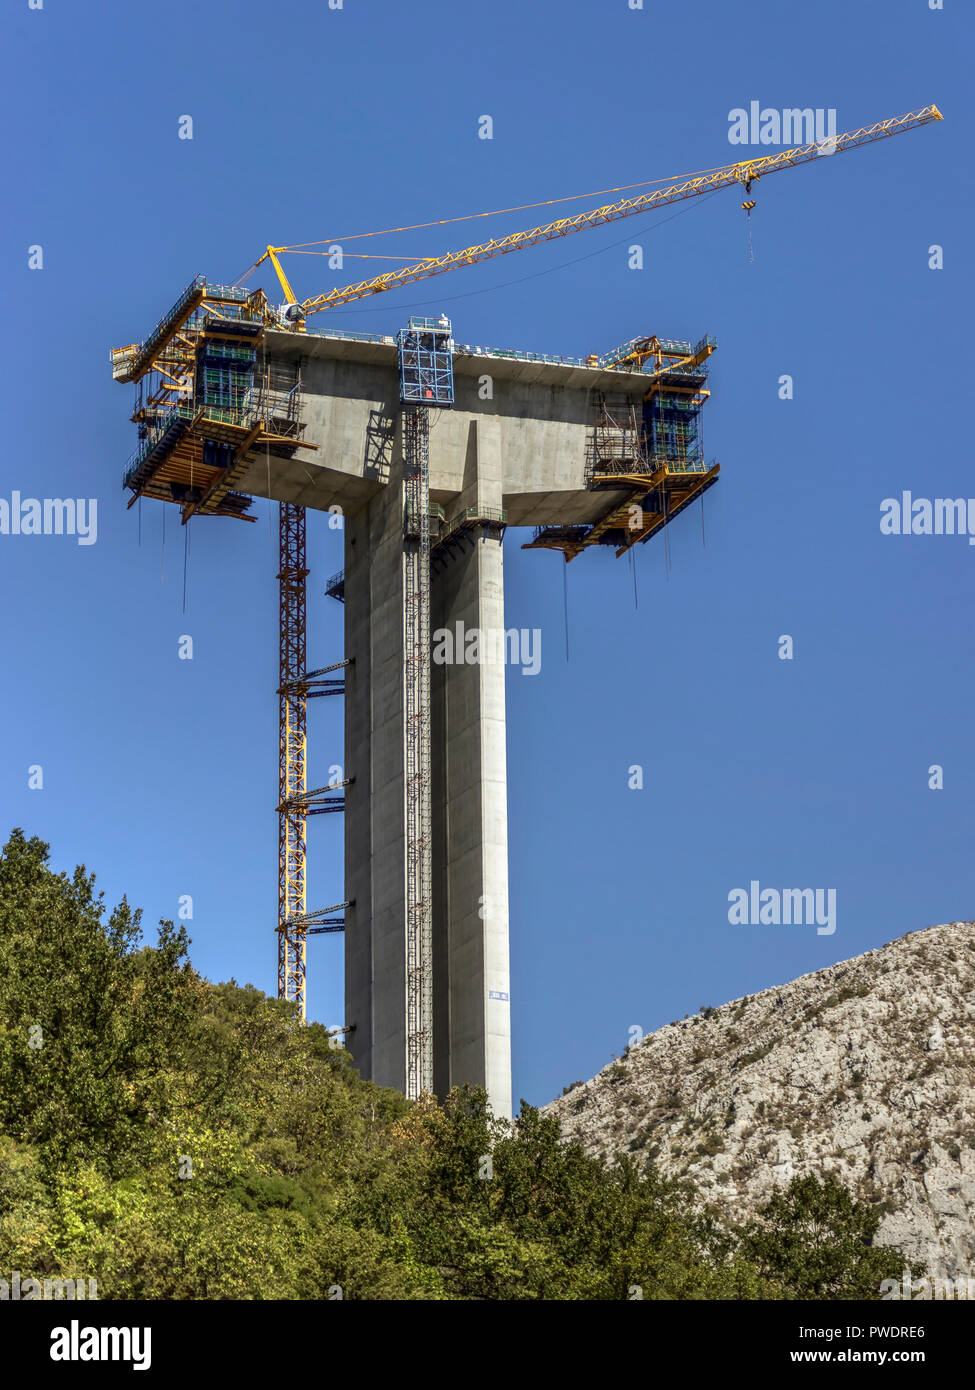 Montenegro, September 2018 - Construction of supporting concrete pillars for the future bridge over Moraca canyon on the Bar-Boljare highway Stock Photo